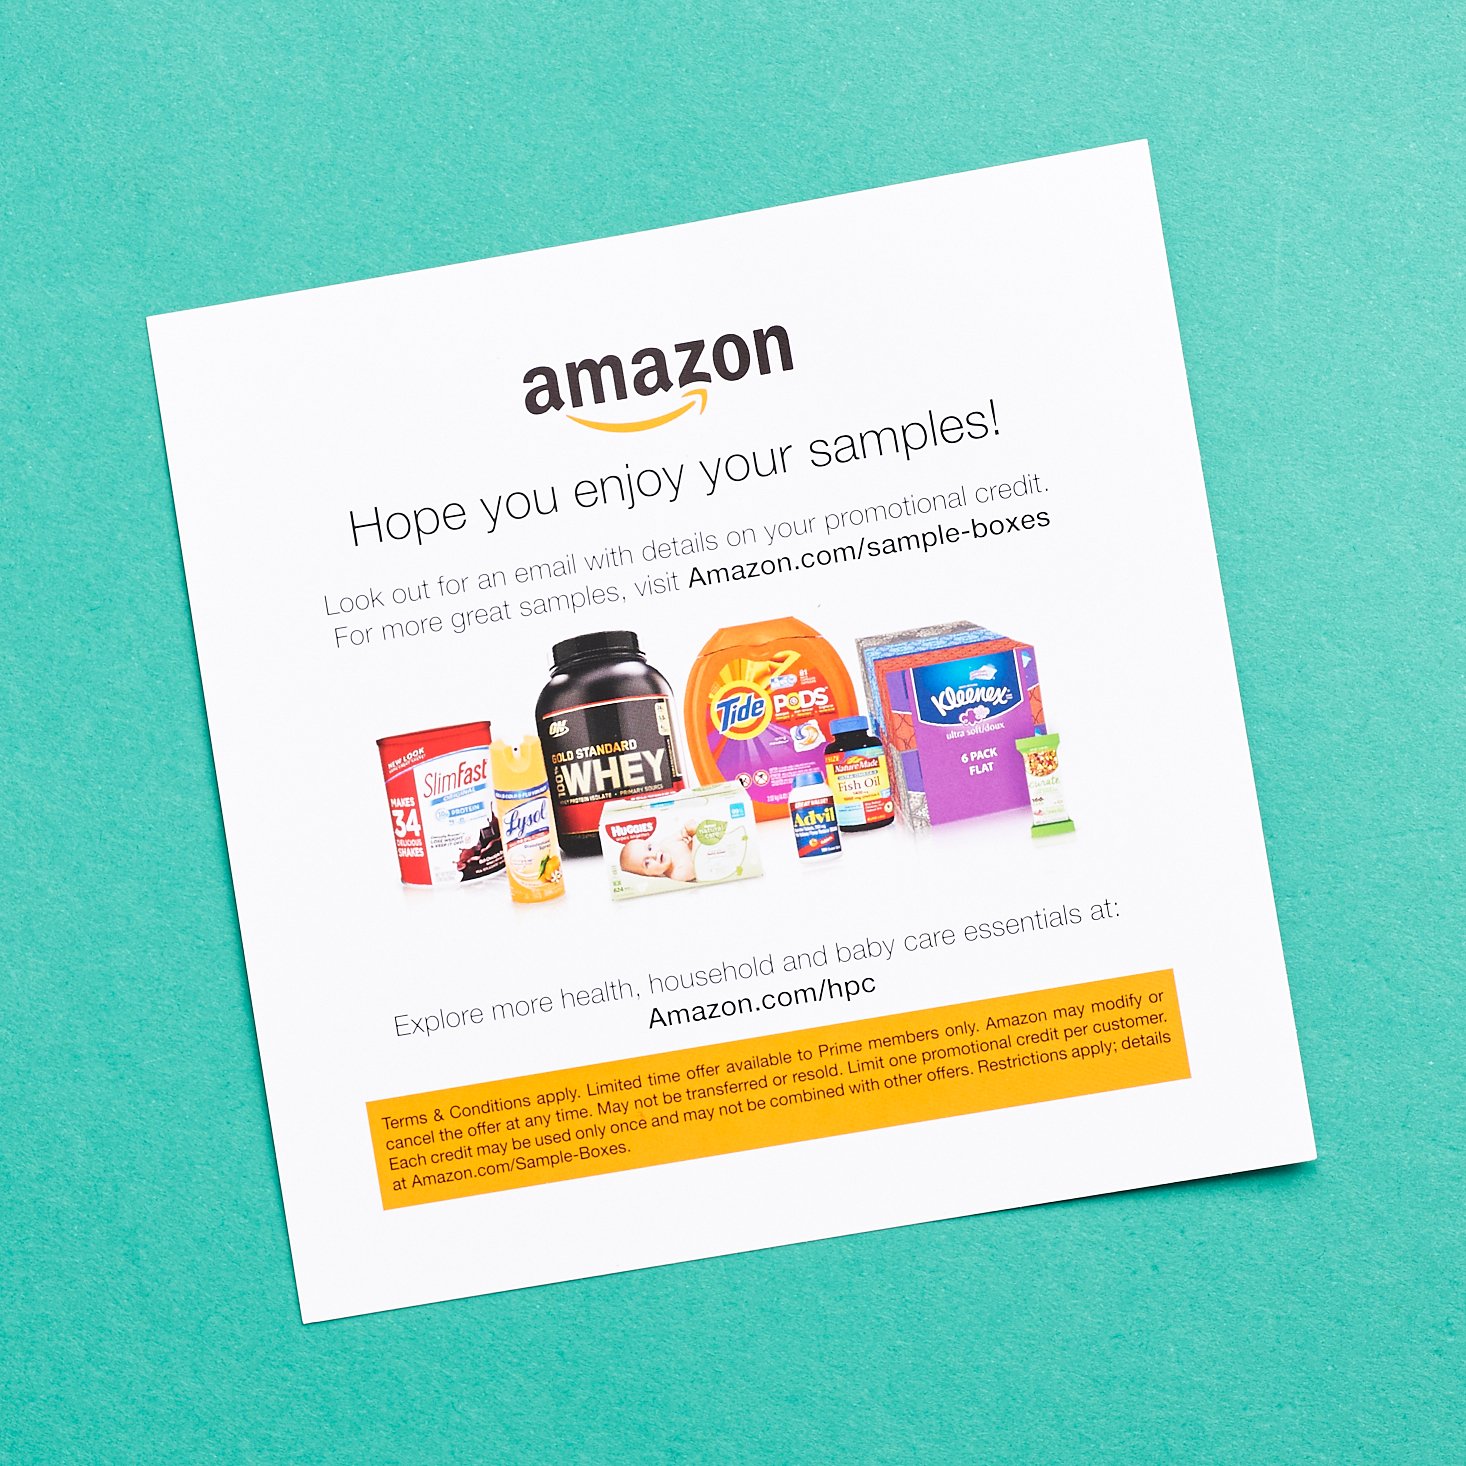 Check out our review of the New Year New You box from Amazon!